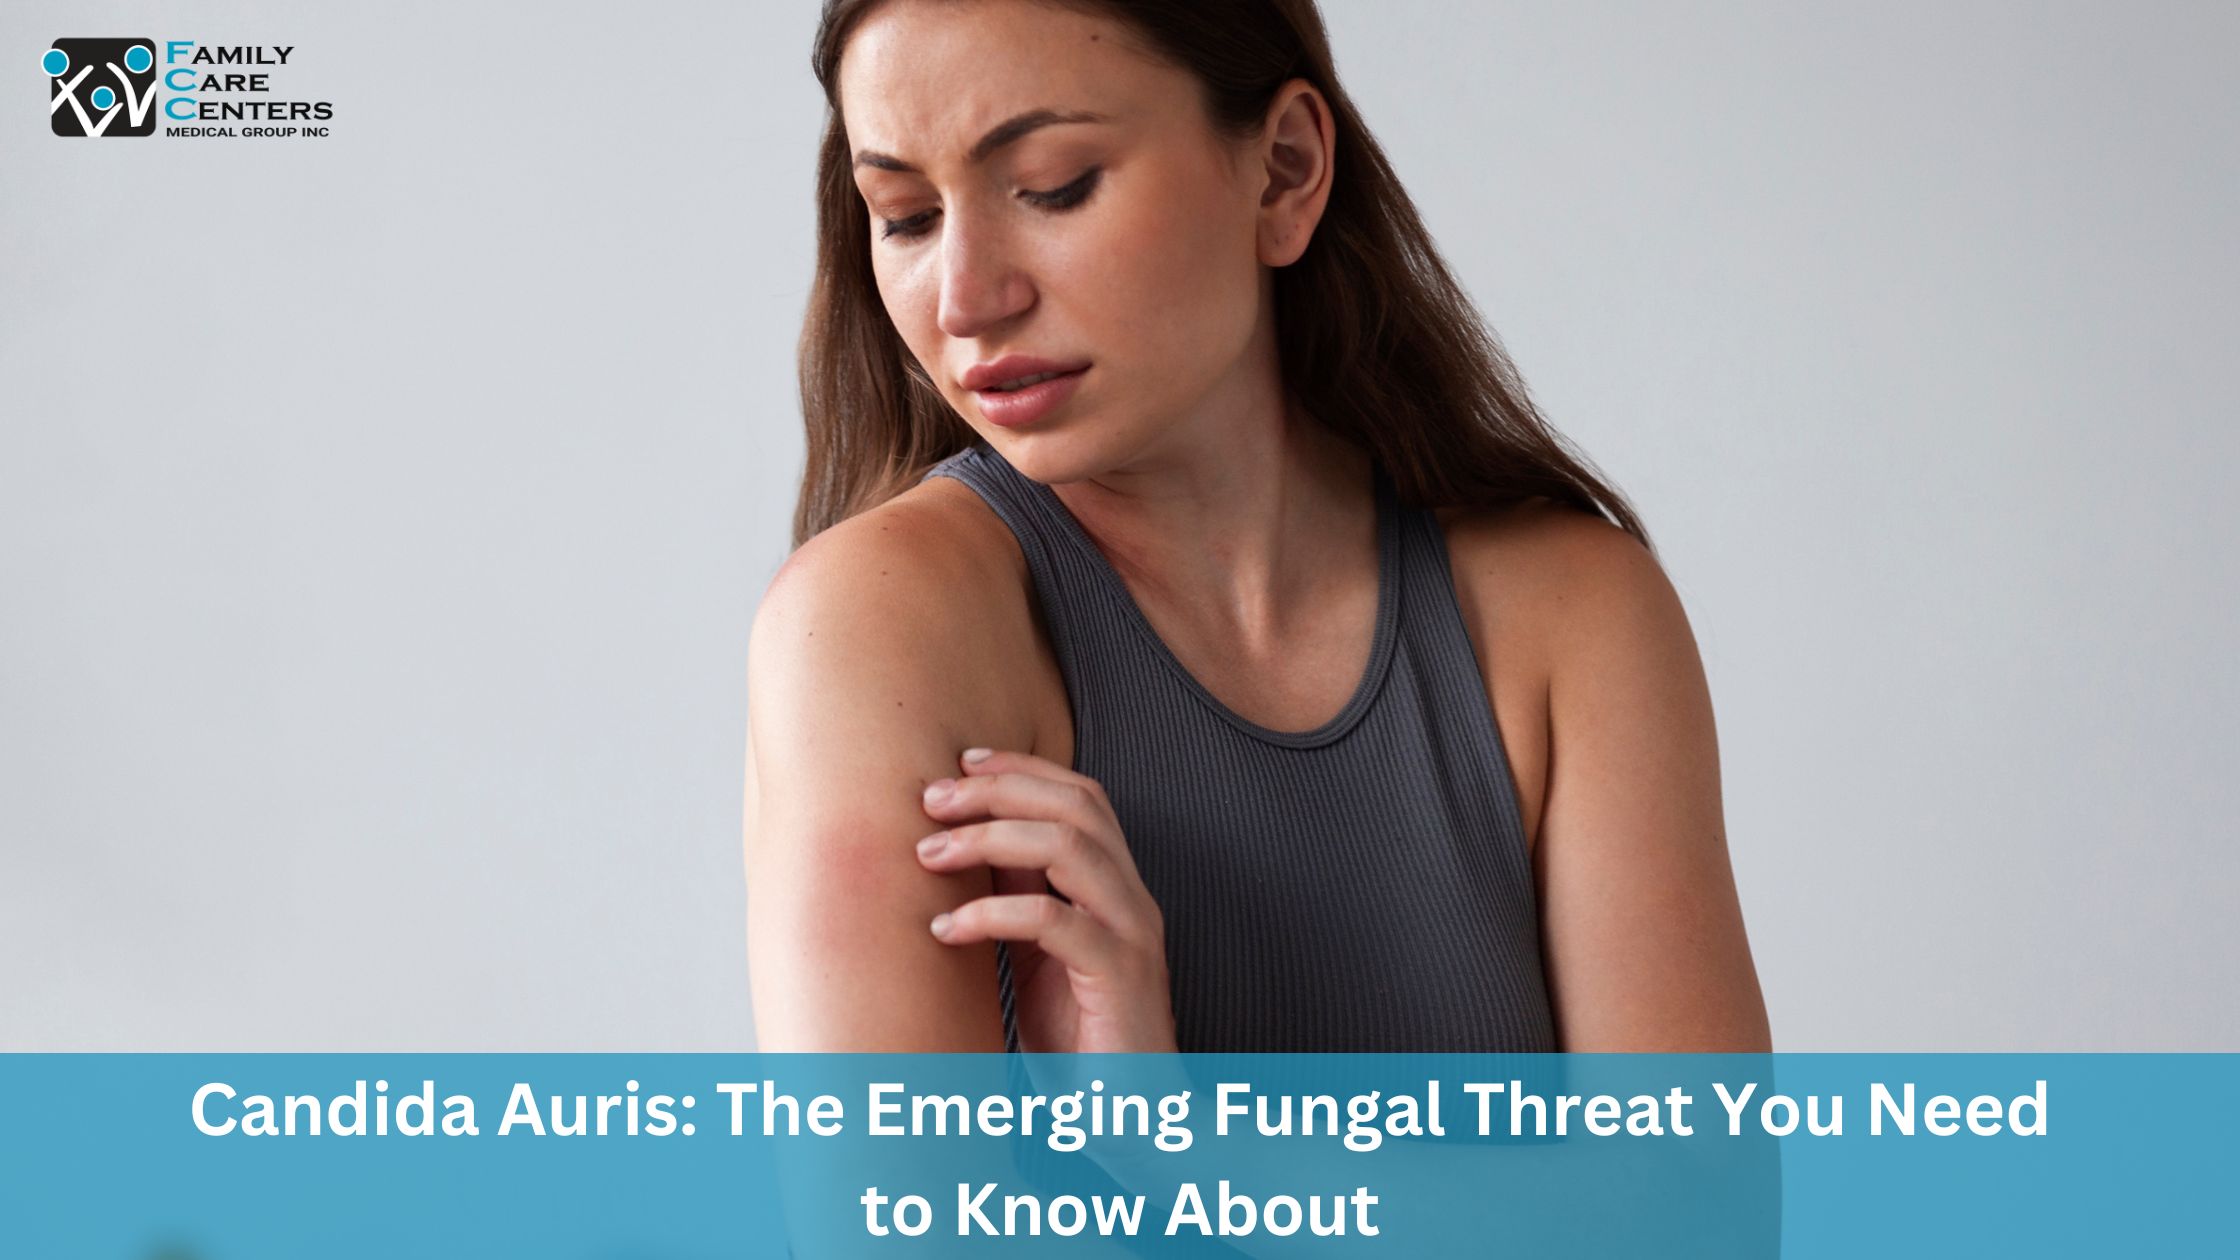 Candida Auris: The Emerging Fungal Threat You Need to Know About 